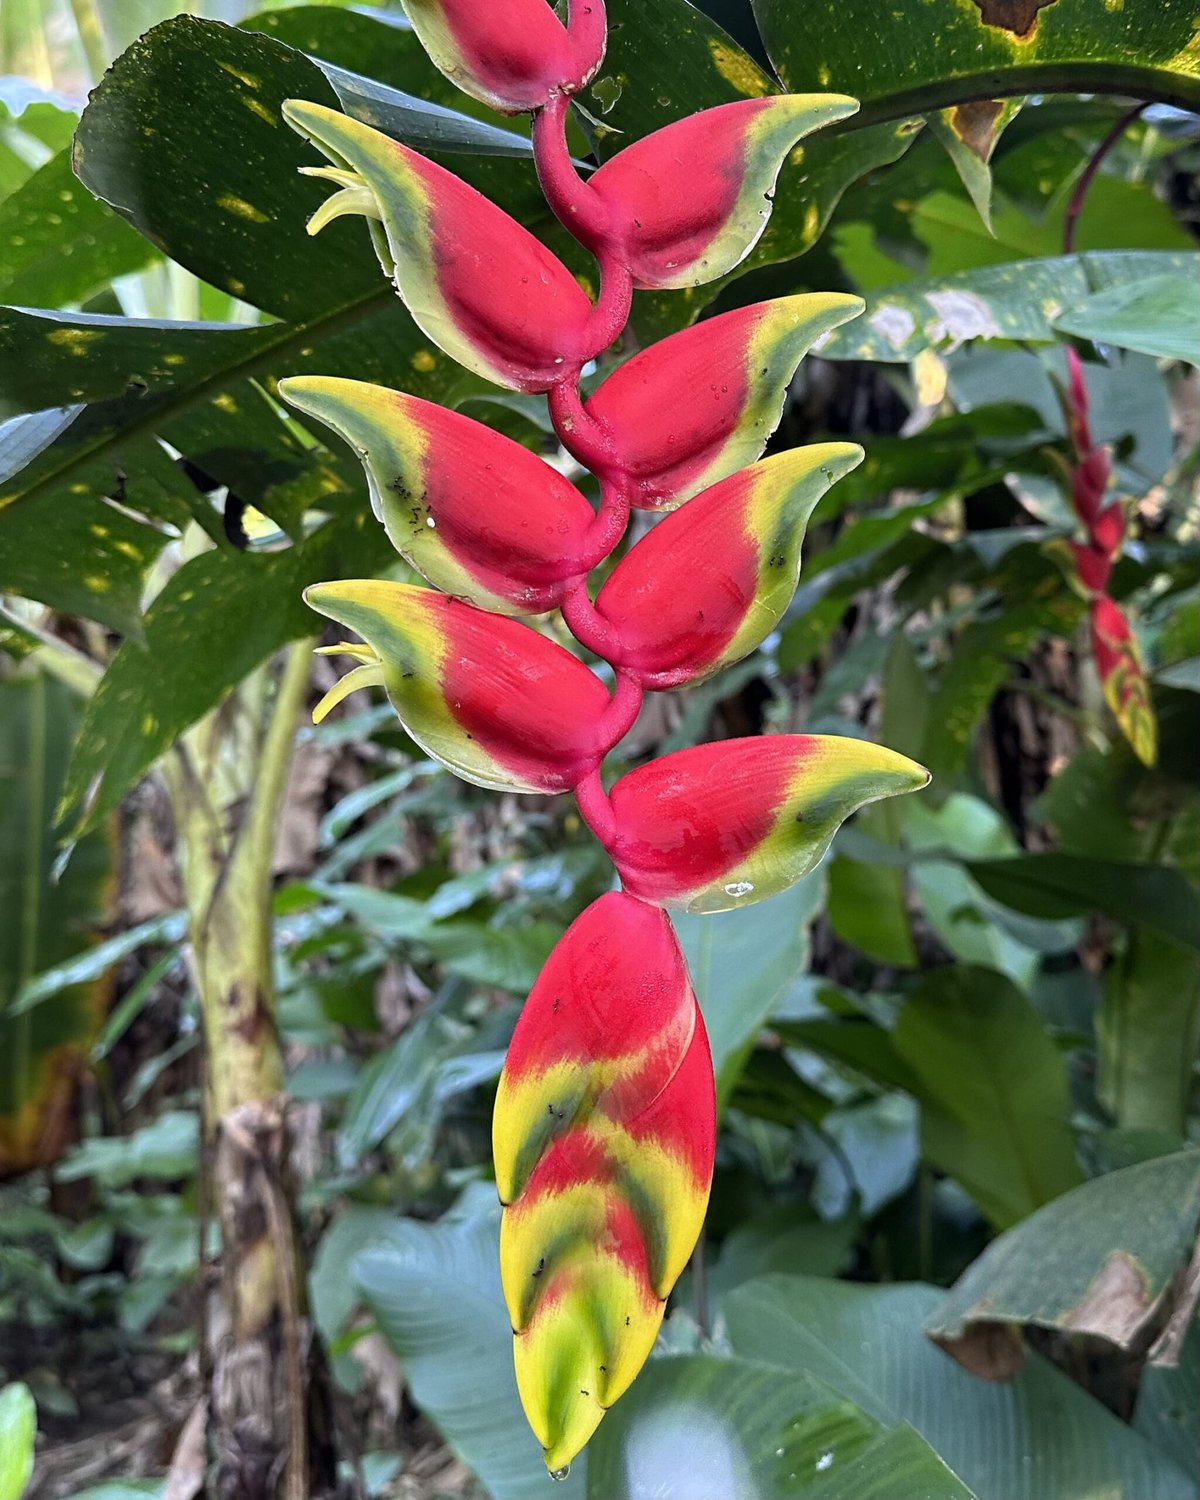 The Heliconia flower, nicknamed the Lobster Claw.